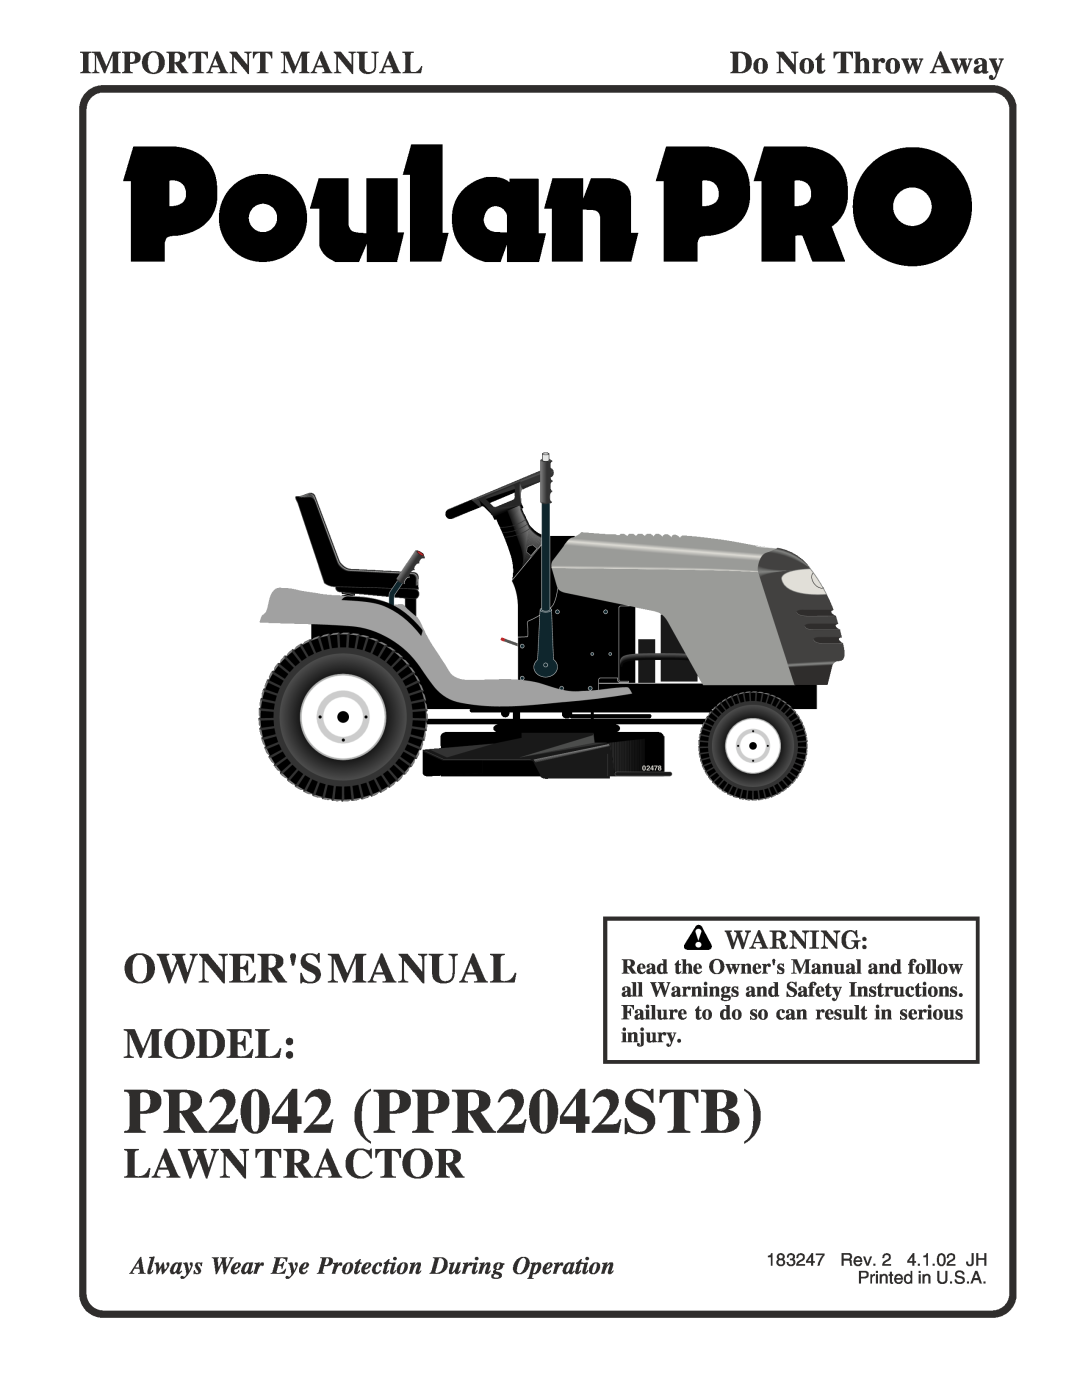 Poulan owner manual PR2042 PPR2042STB, Lawntractor, Important Manual, Do Not Throw Away, 02478 